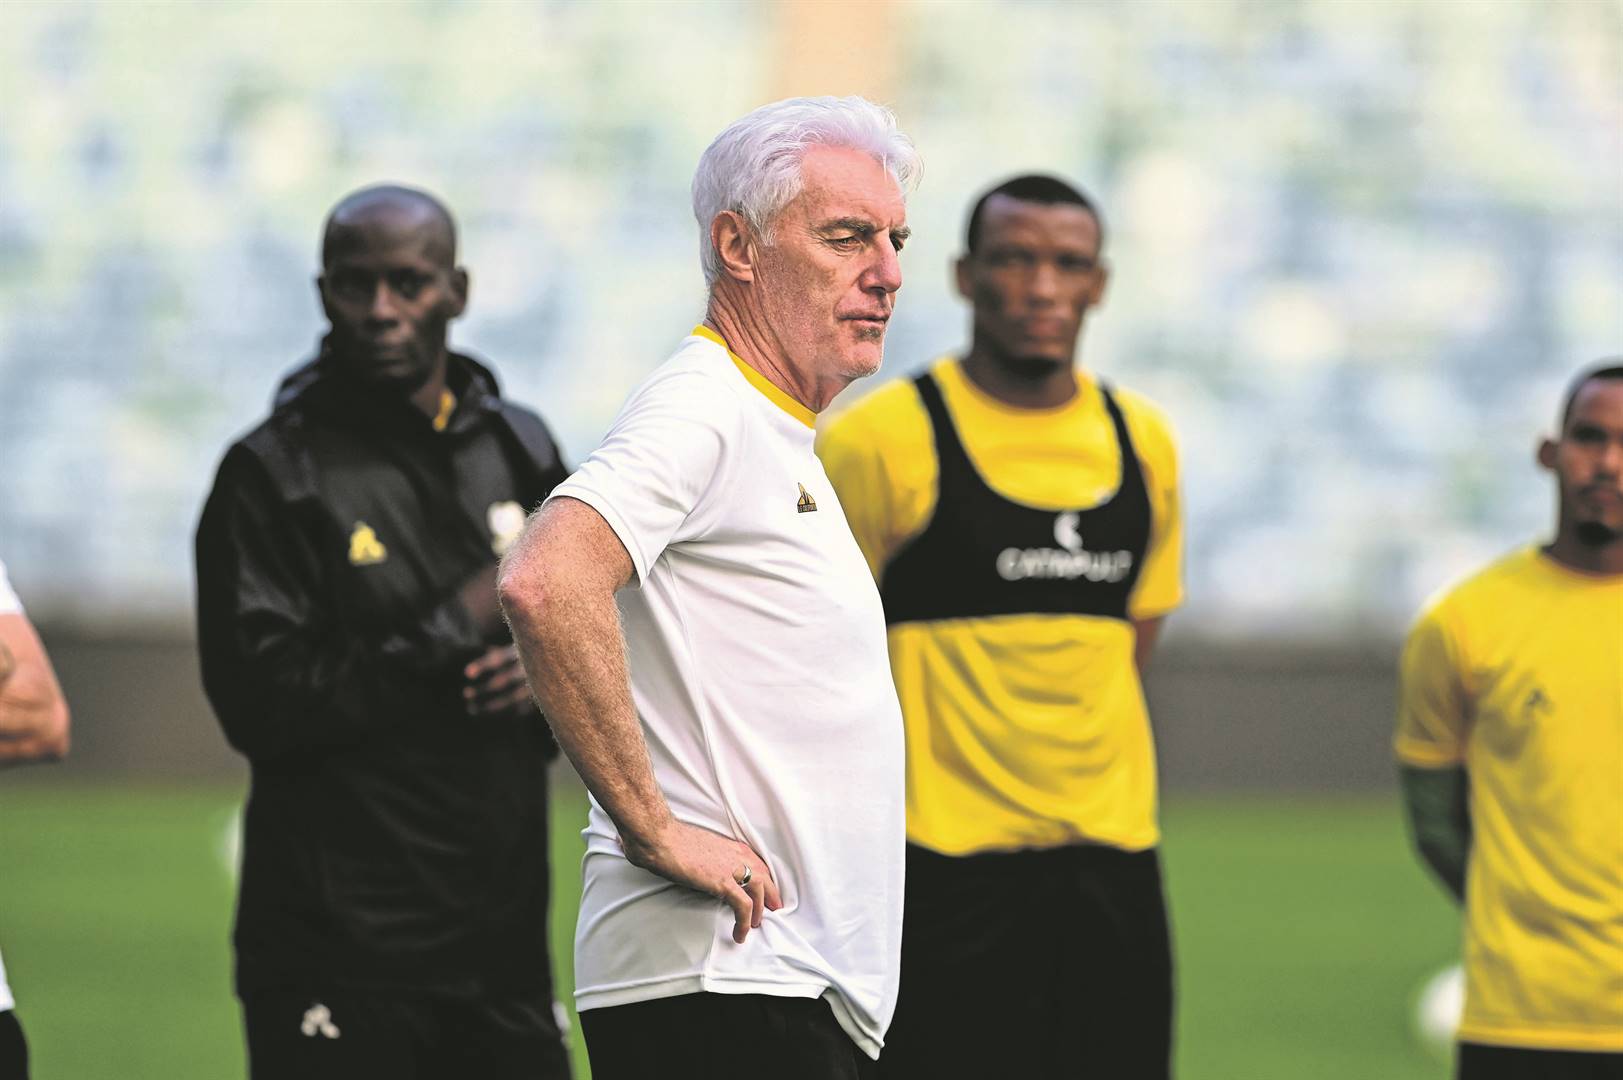 Bafana head coach Hugo Broos and his team are preparing for the Afcon tournament in Stellenbosch near Cape Town.